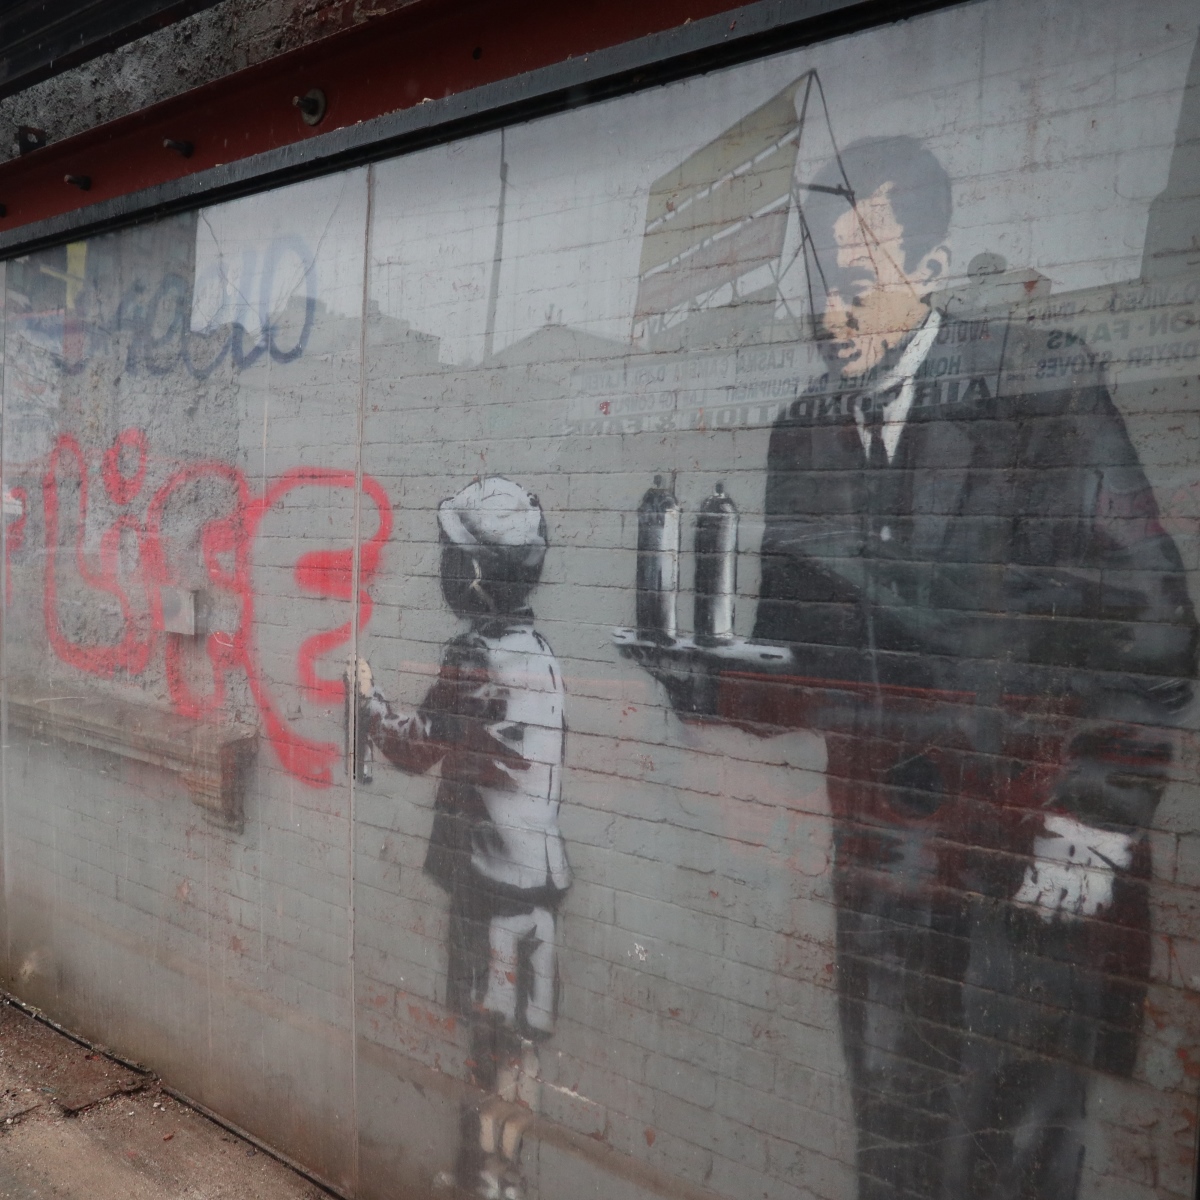 The Art of Vandalism, or Is Street Art Preservation Necessary